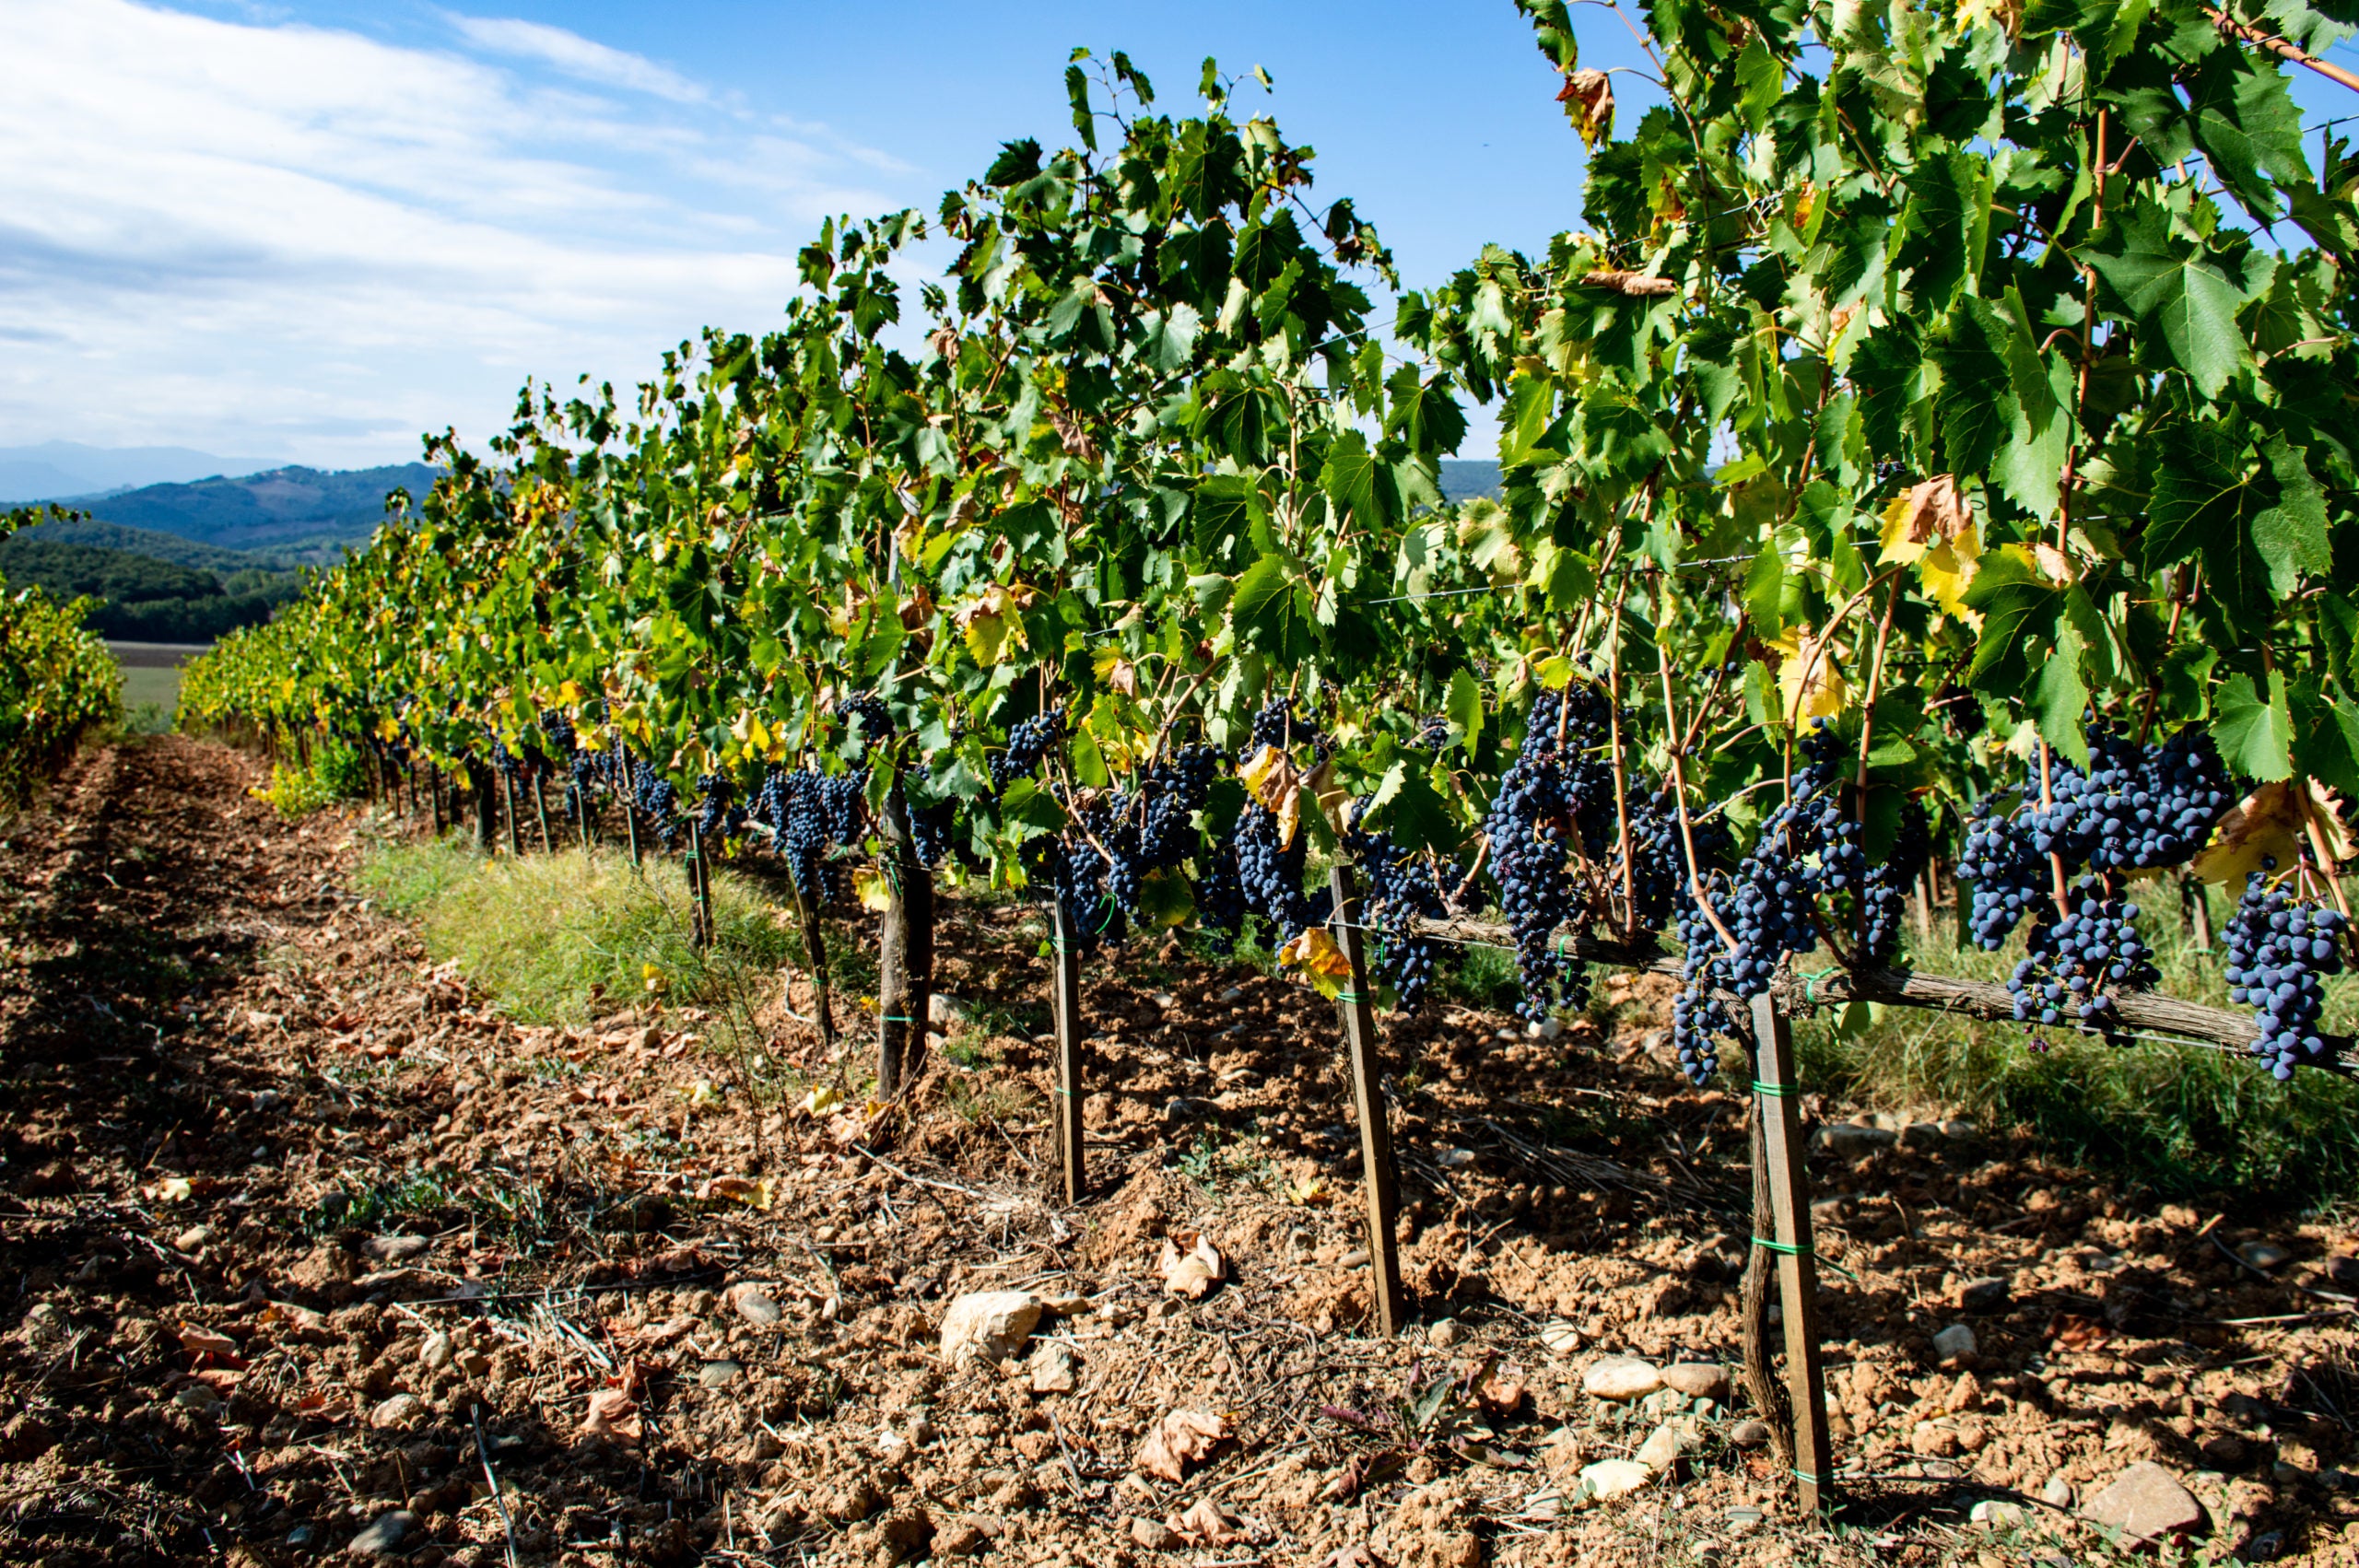 Creating World-class Wine With The Vines of Montalcino